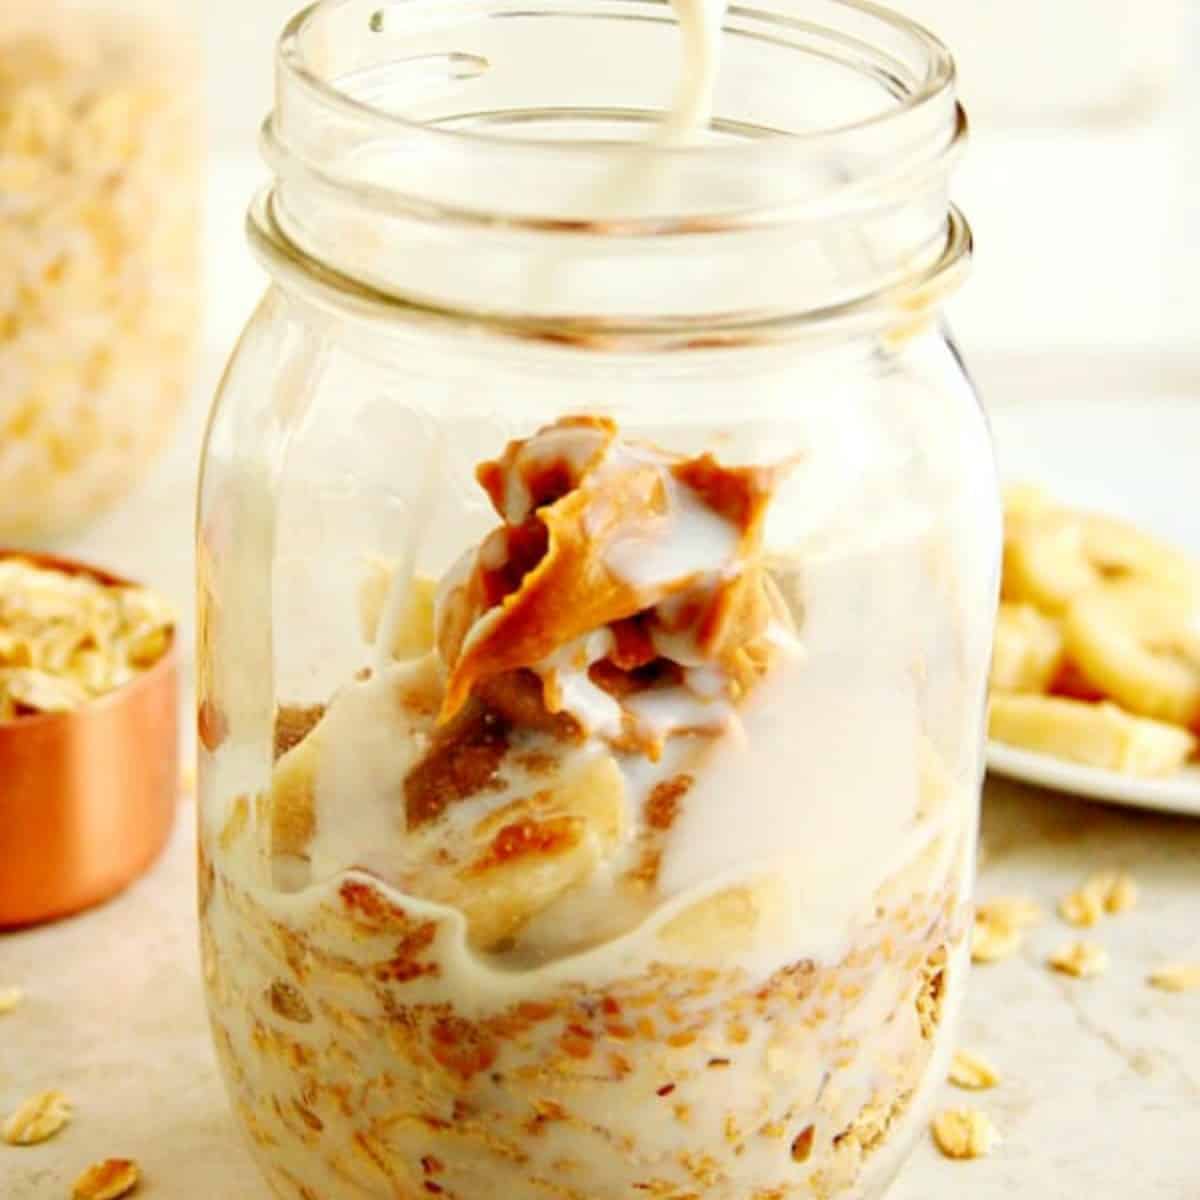 Overnight oats with peanut butter in a jar.